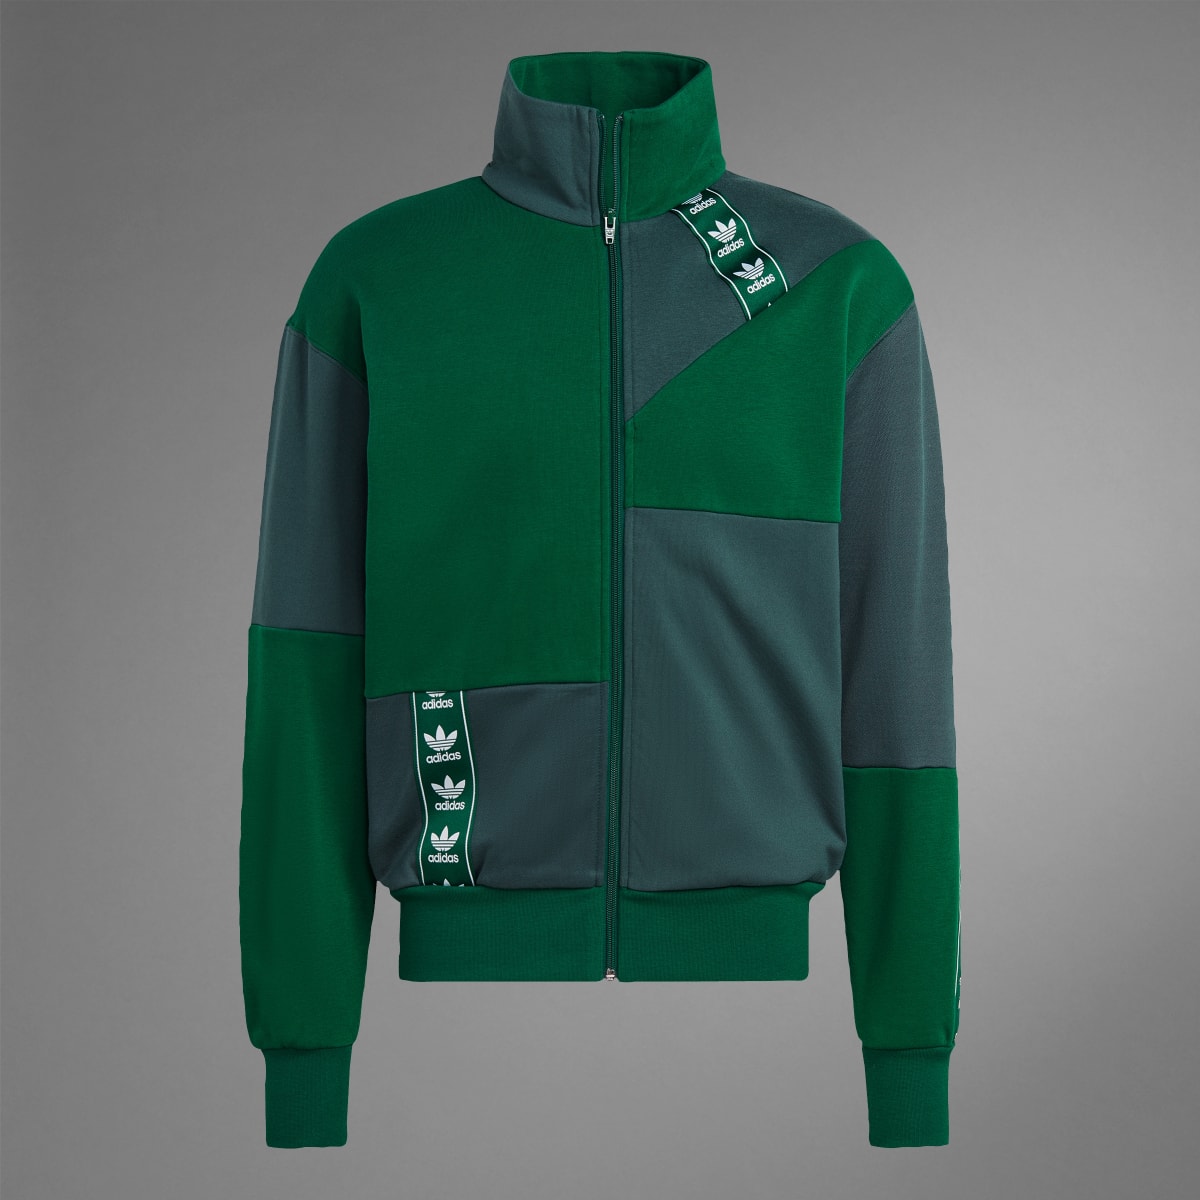 Adidas Track top ADC Patchwork FB. 10